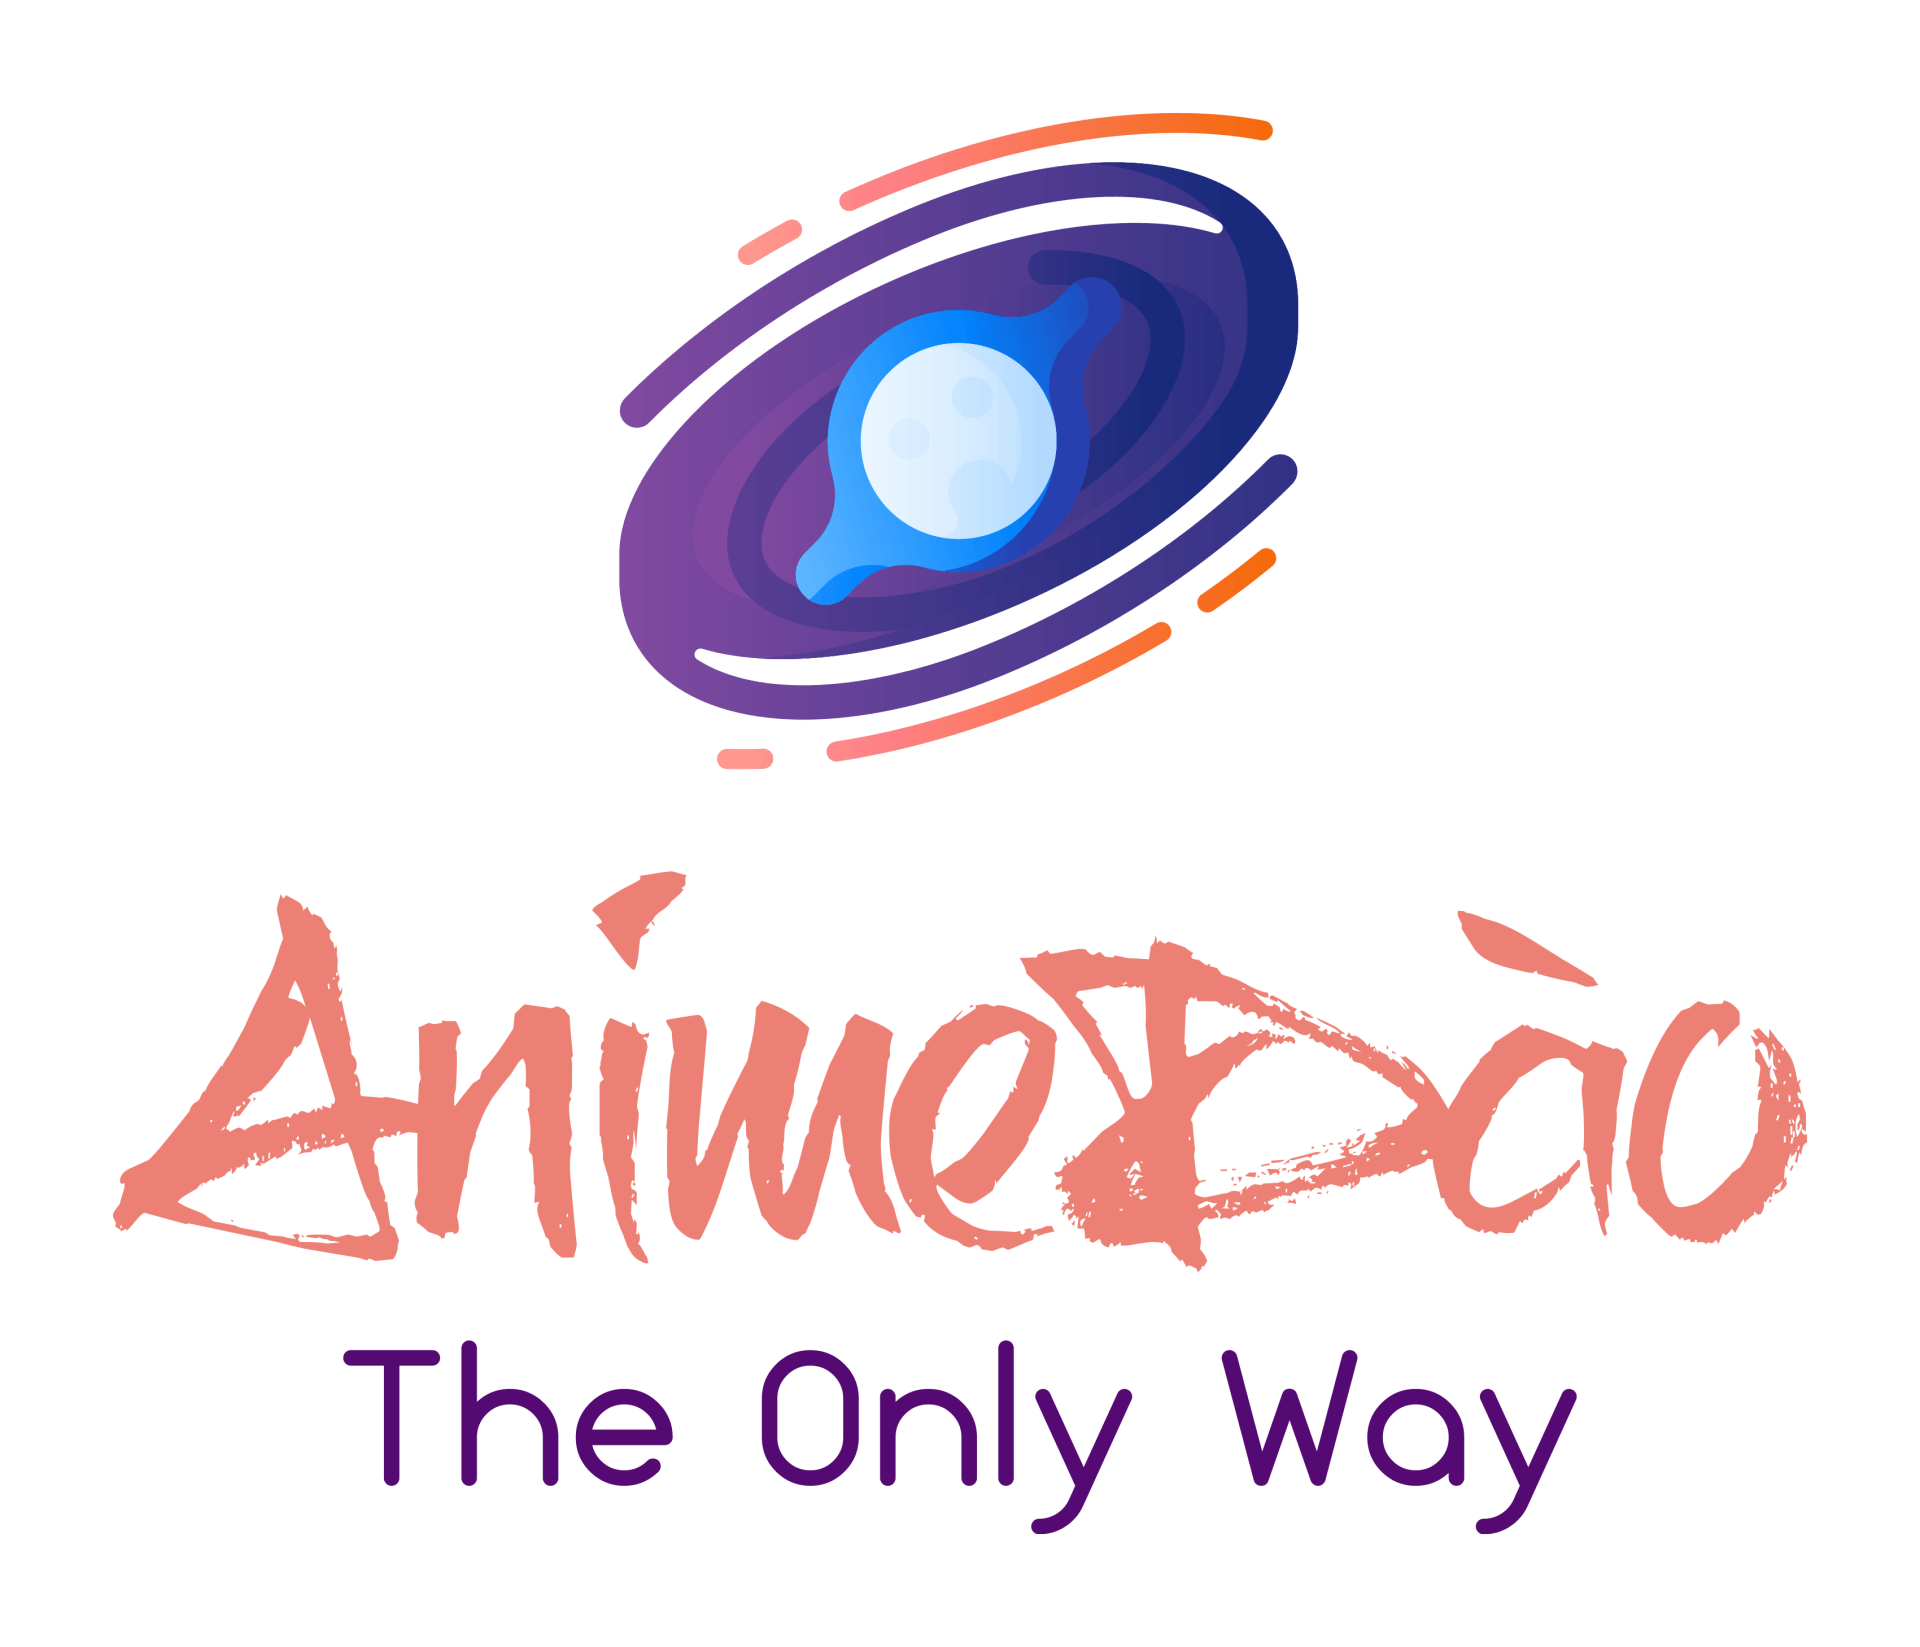 A vibrant logo featuring a blue eye illustration accompanied by the stylized text "AnimeDao" and the tagline "The Only Way."